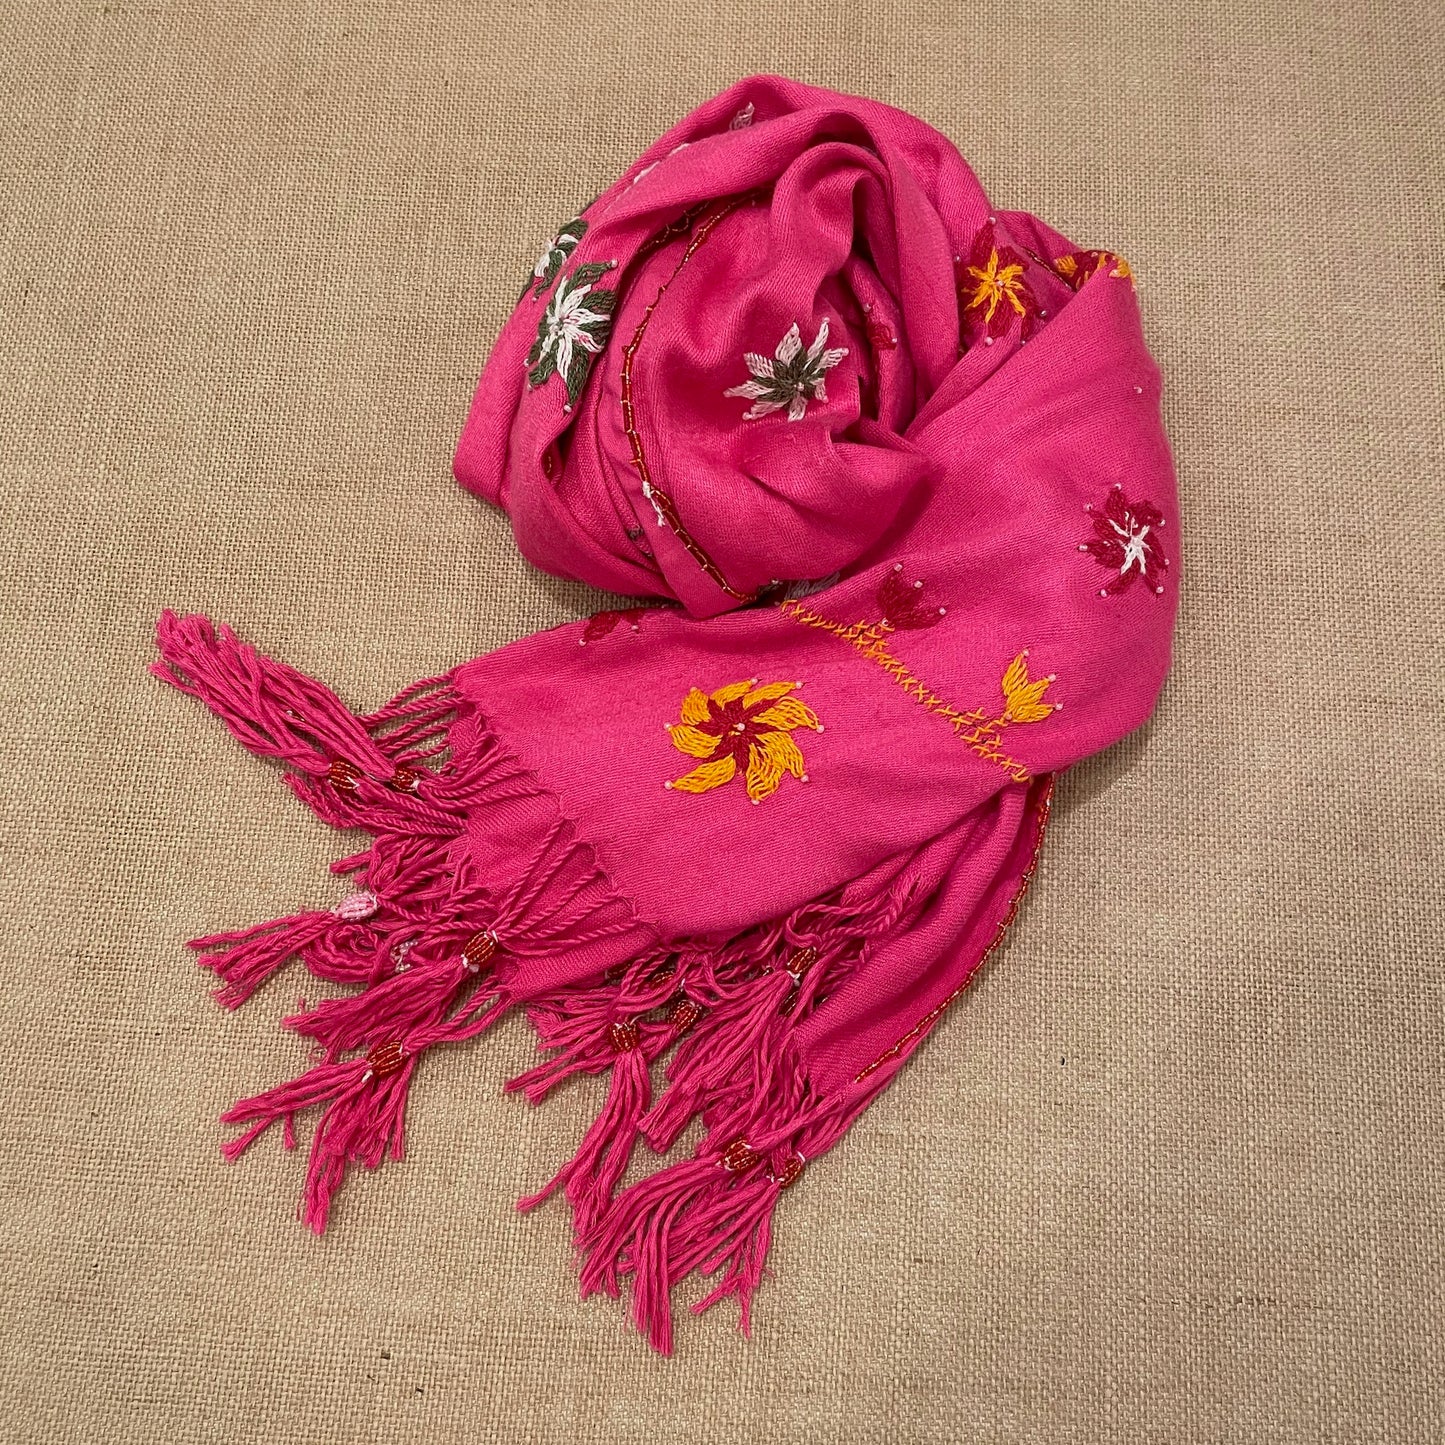 Bedouin Hand-embroidered Hot Pink Pashmina Scarf